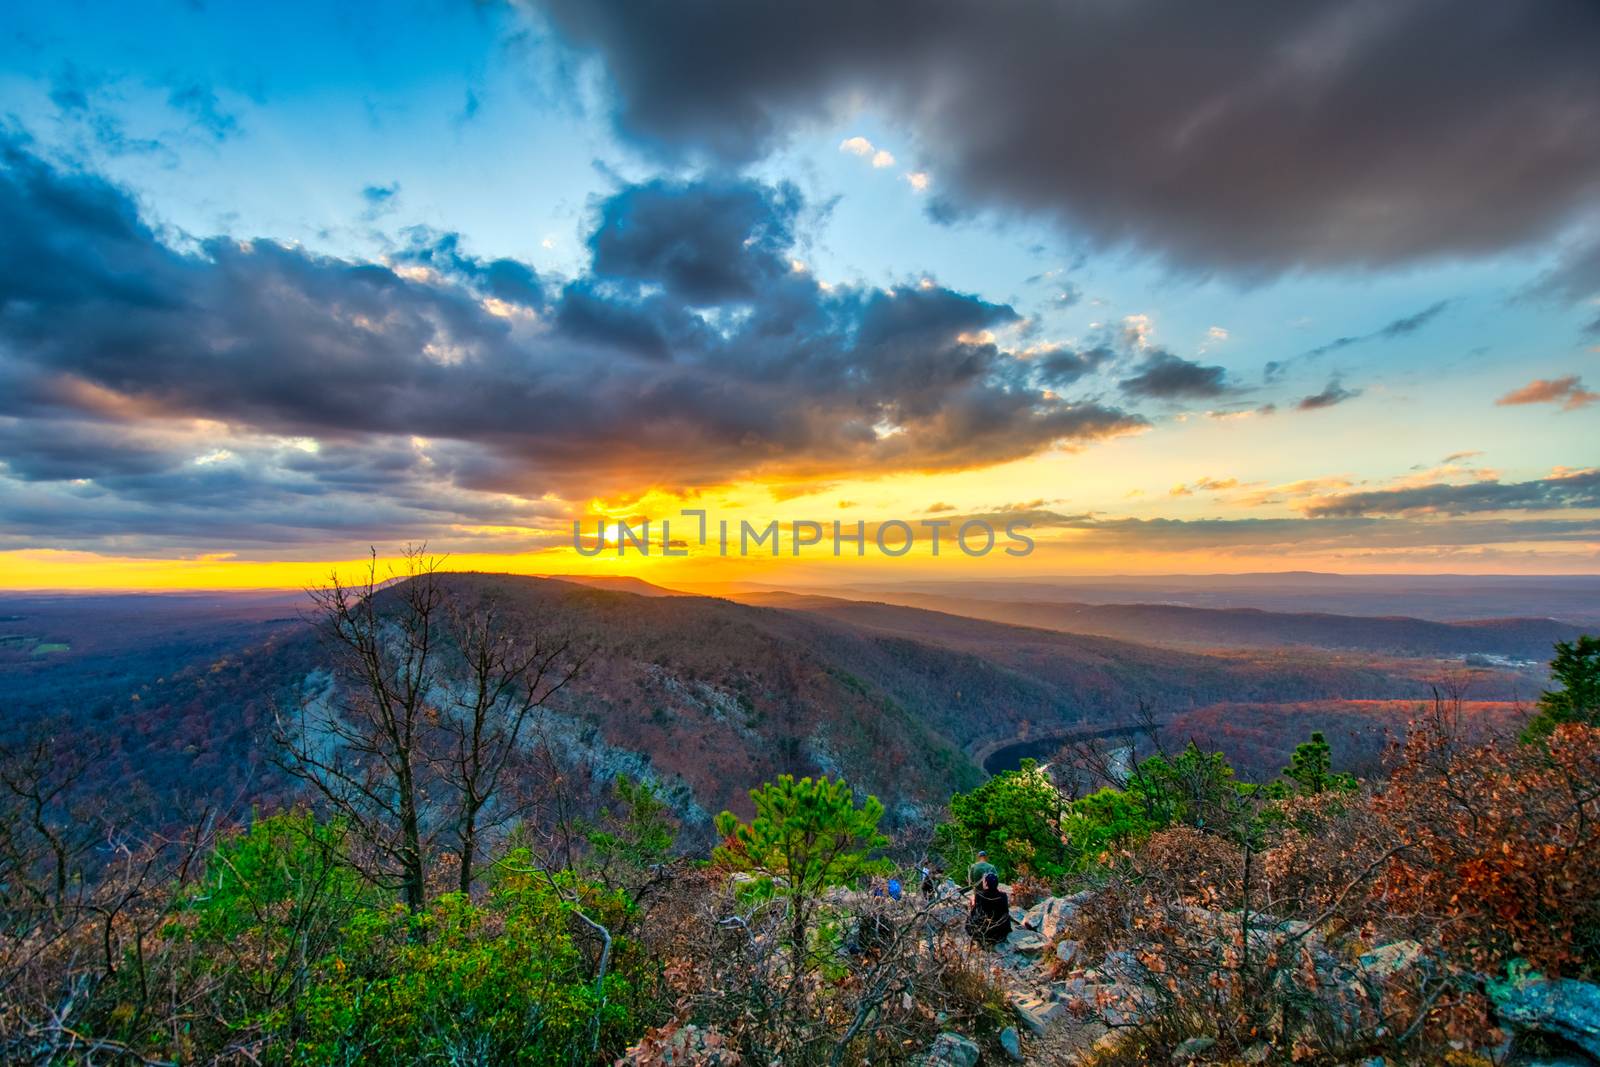 A View of the Sunset From the Peak at Mount Tammany at the Delaw by bju12290